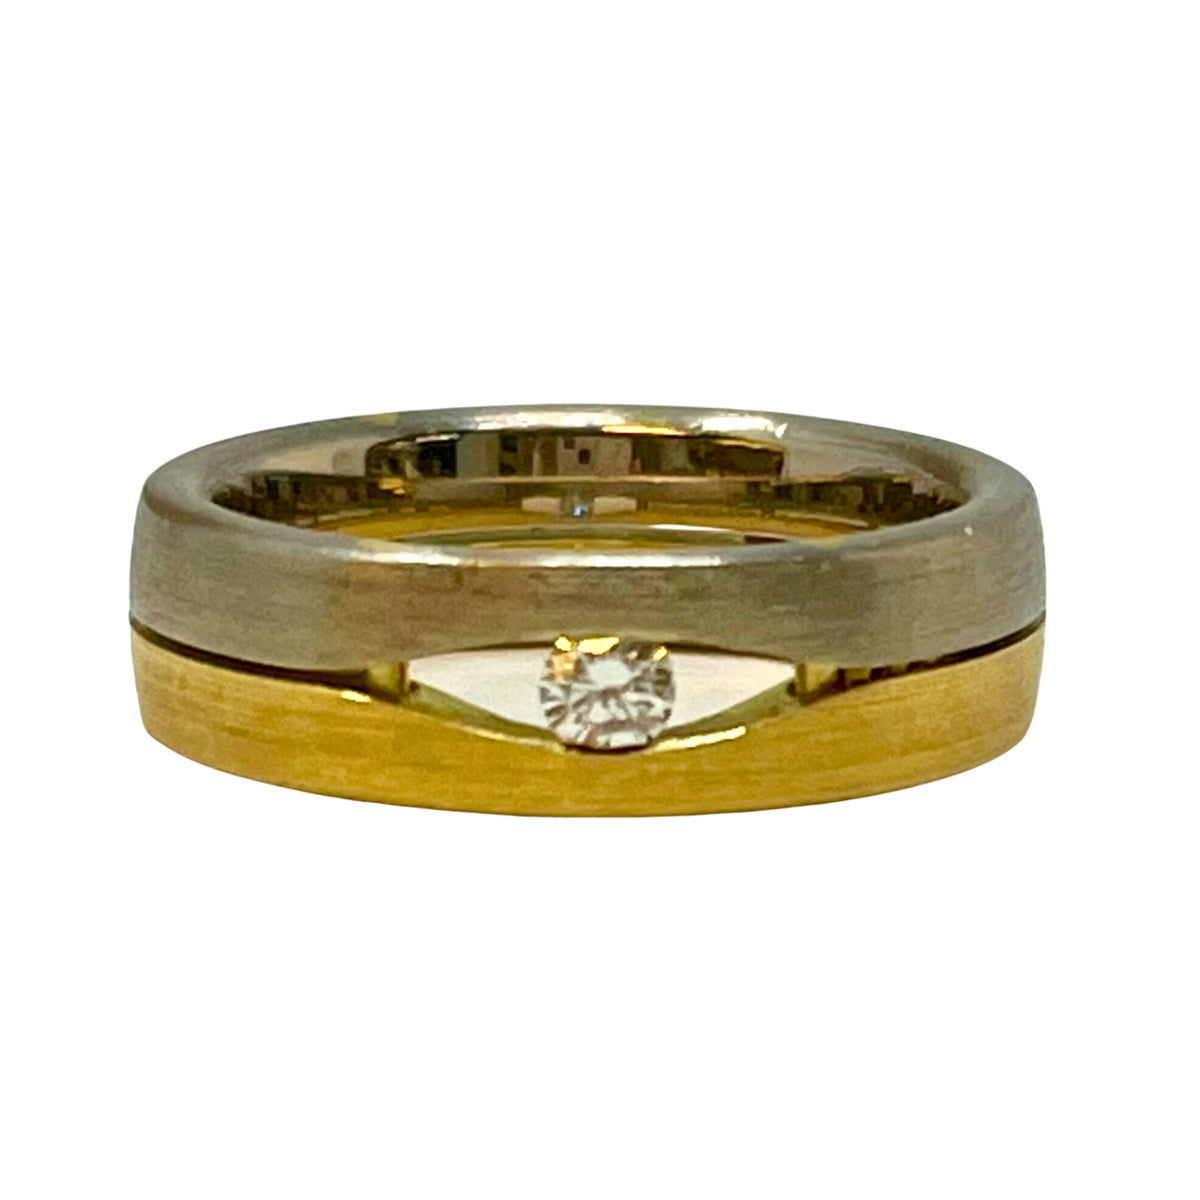 Christian Bauer 18K Yellow and White Gold Band with Diamond